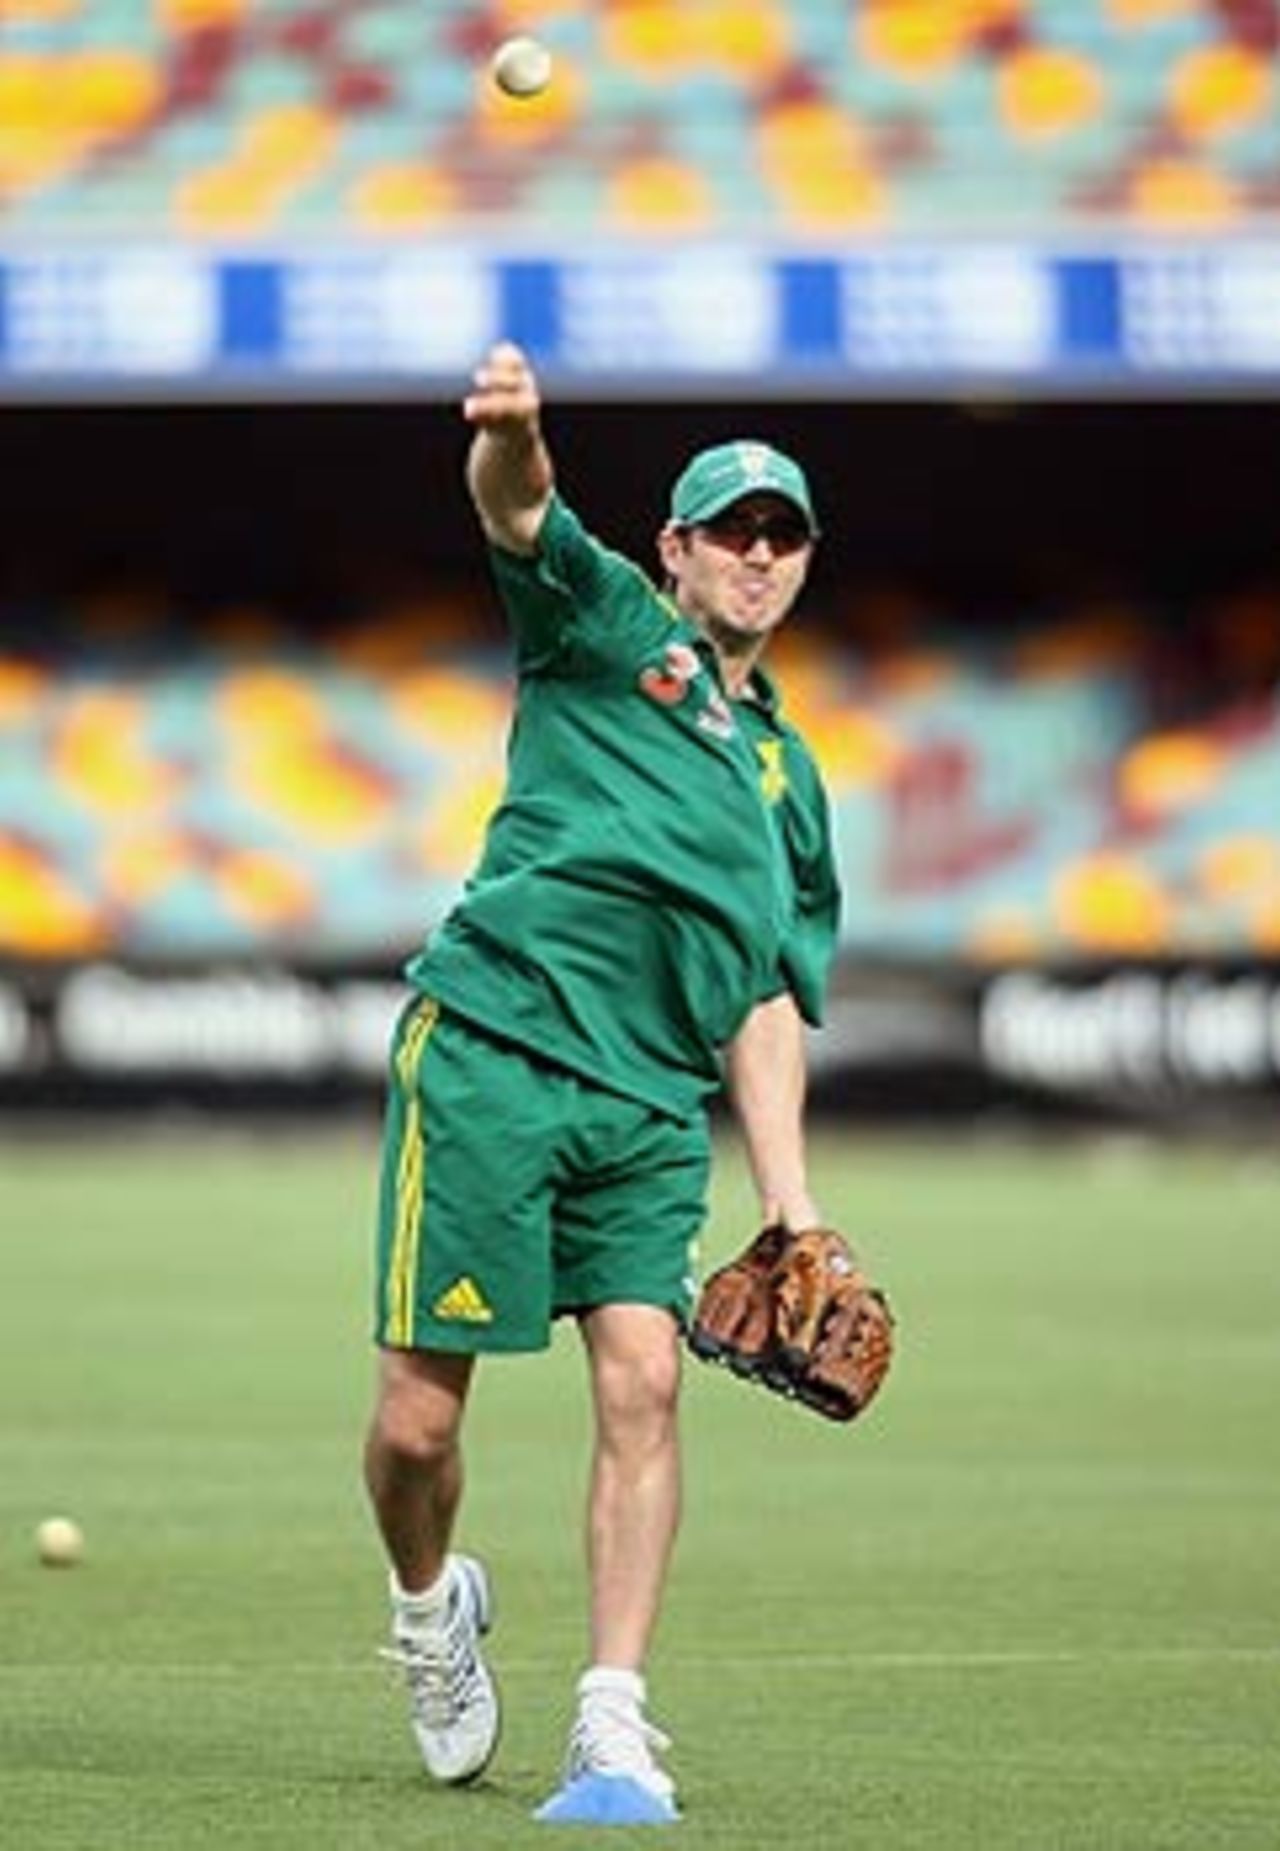 Damien Martyn works on his fielding during a training session at the Gabba ahead of the international Twenty20 match against South Africa, Brisbane, January 8, 2006